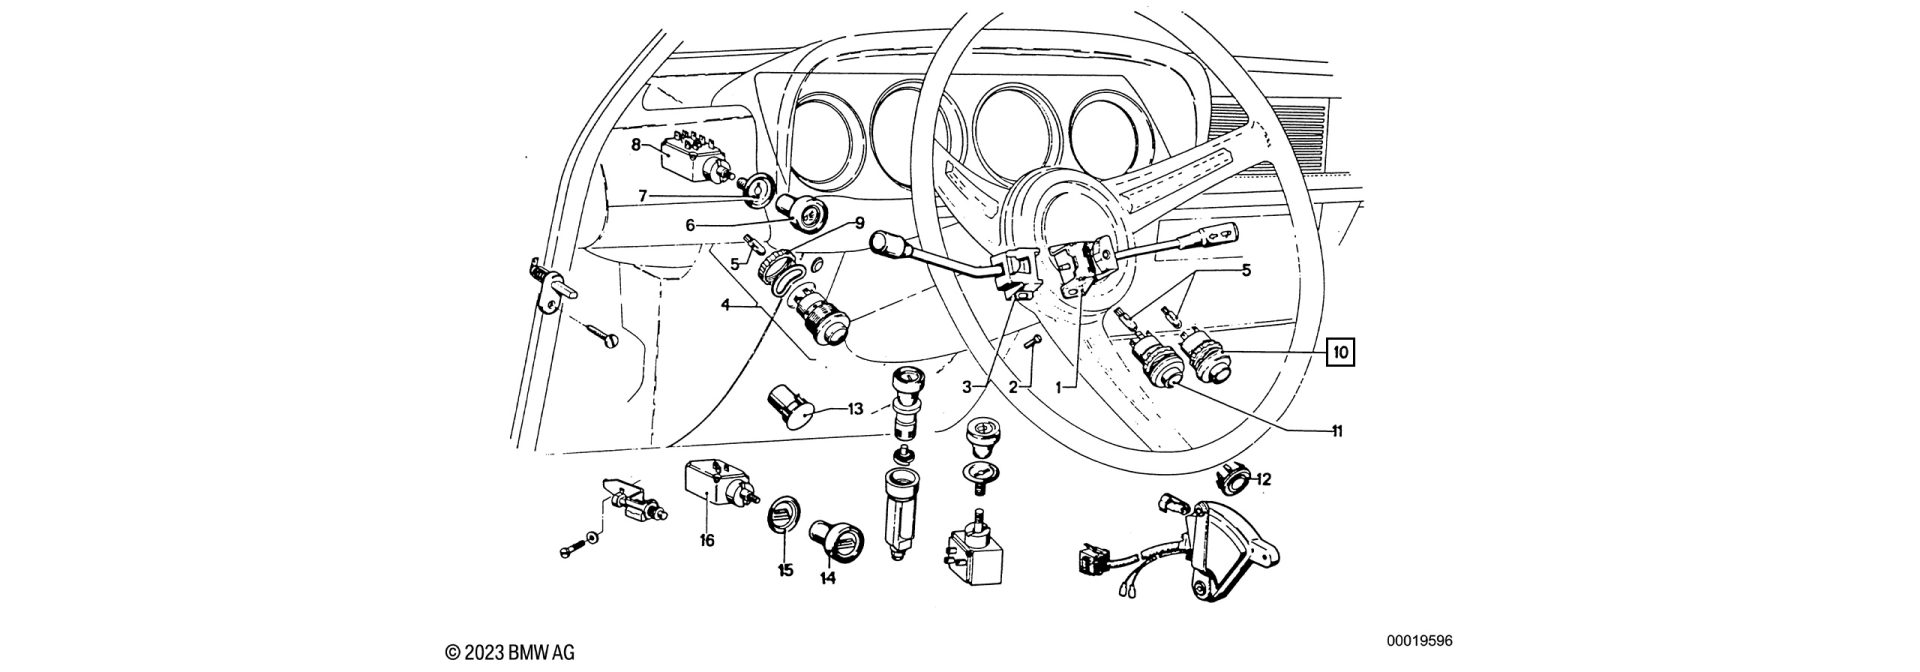 Hazard warning switch exploded-view drawing